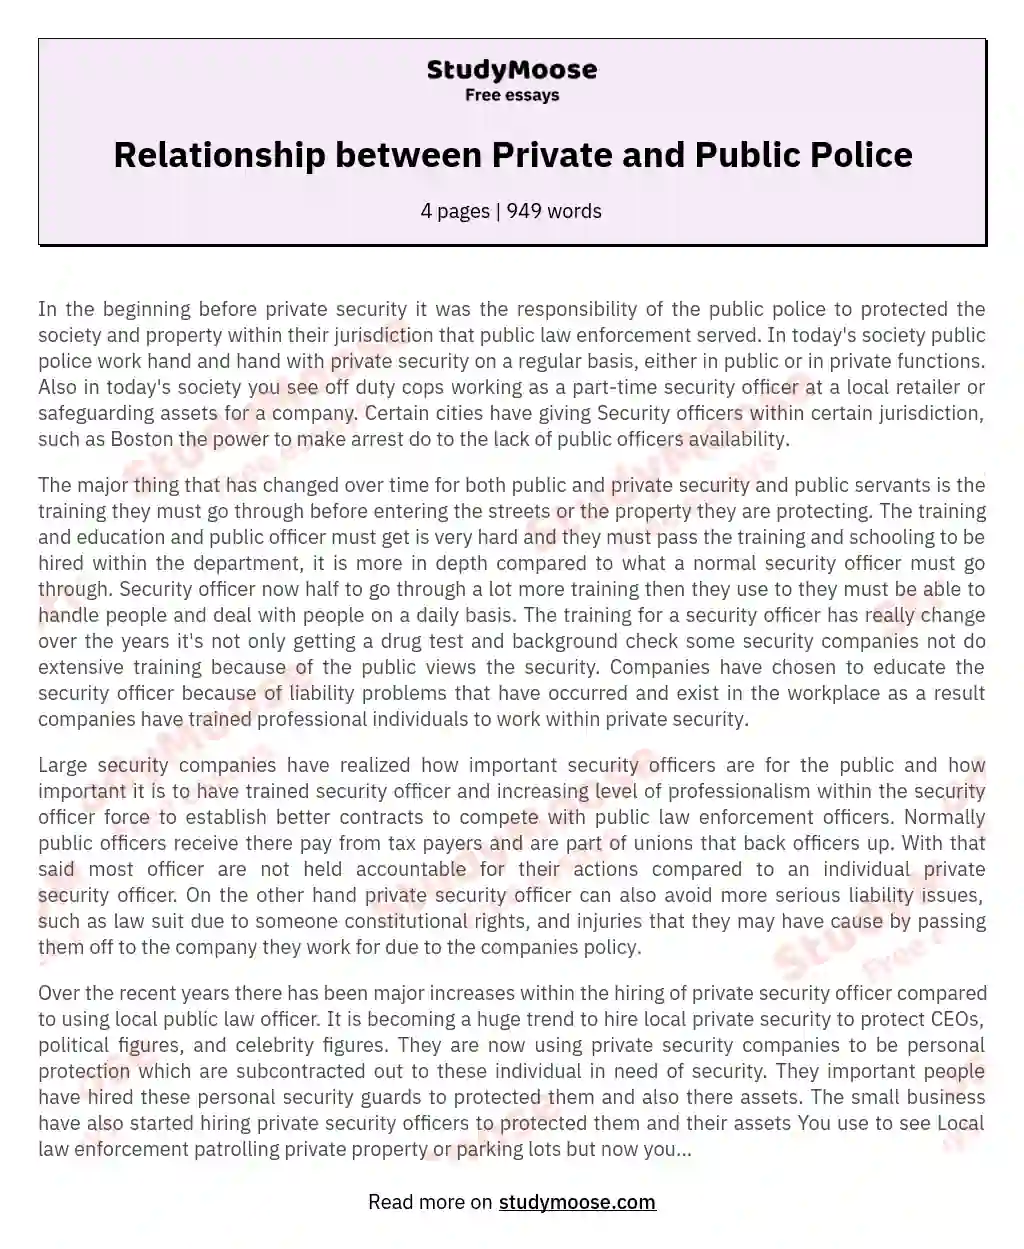 Relationship between Private and Public Police